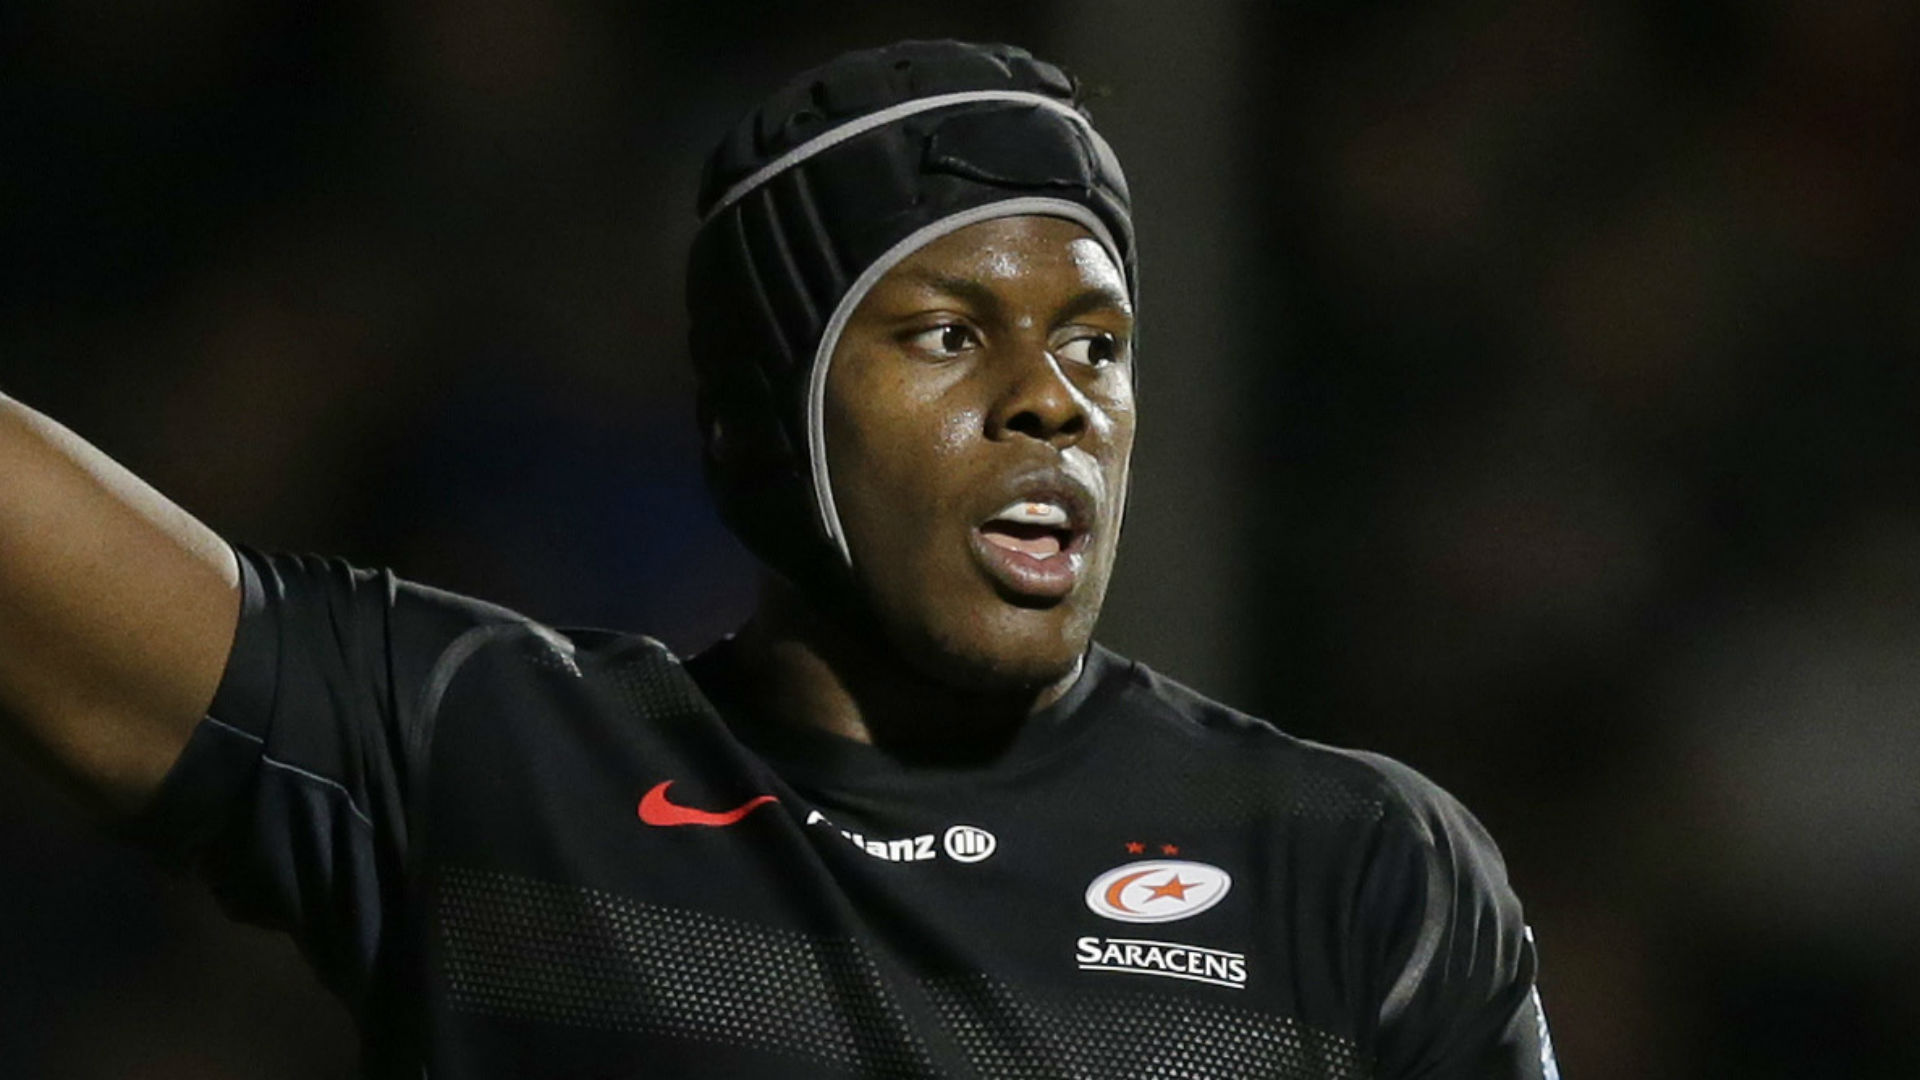 Saracens will be without Maro Itoje for "a number of weeks" after the lock picked up a knee problem on England duty.